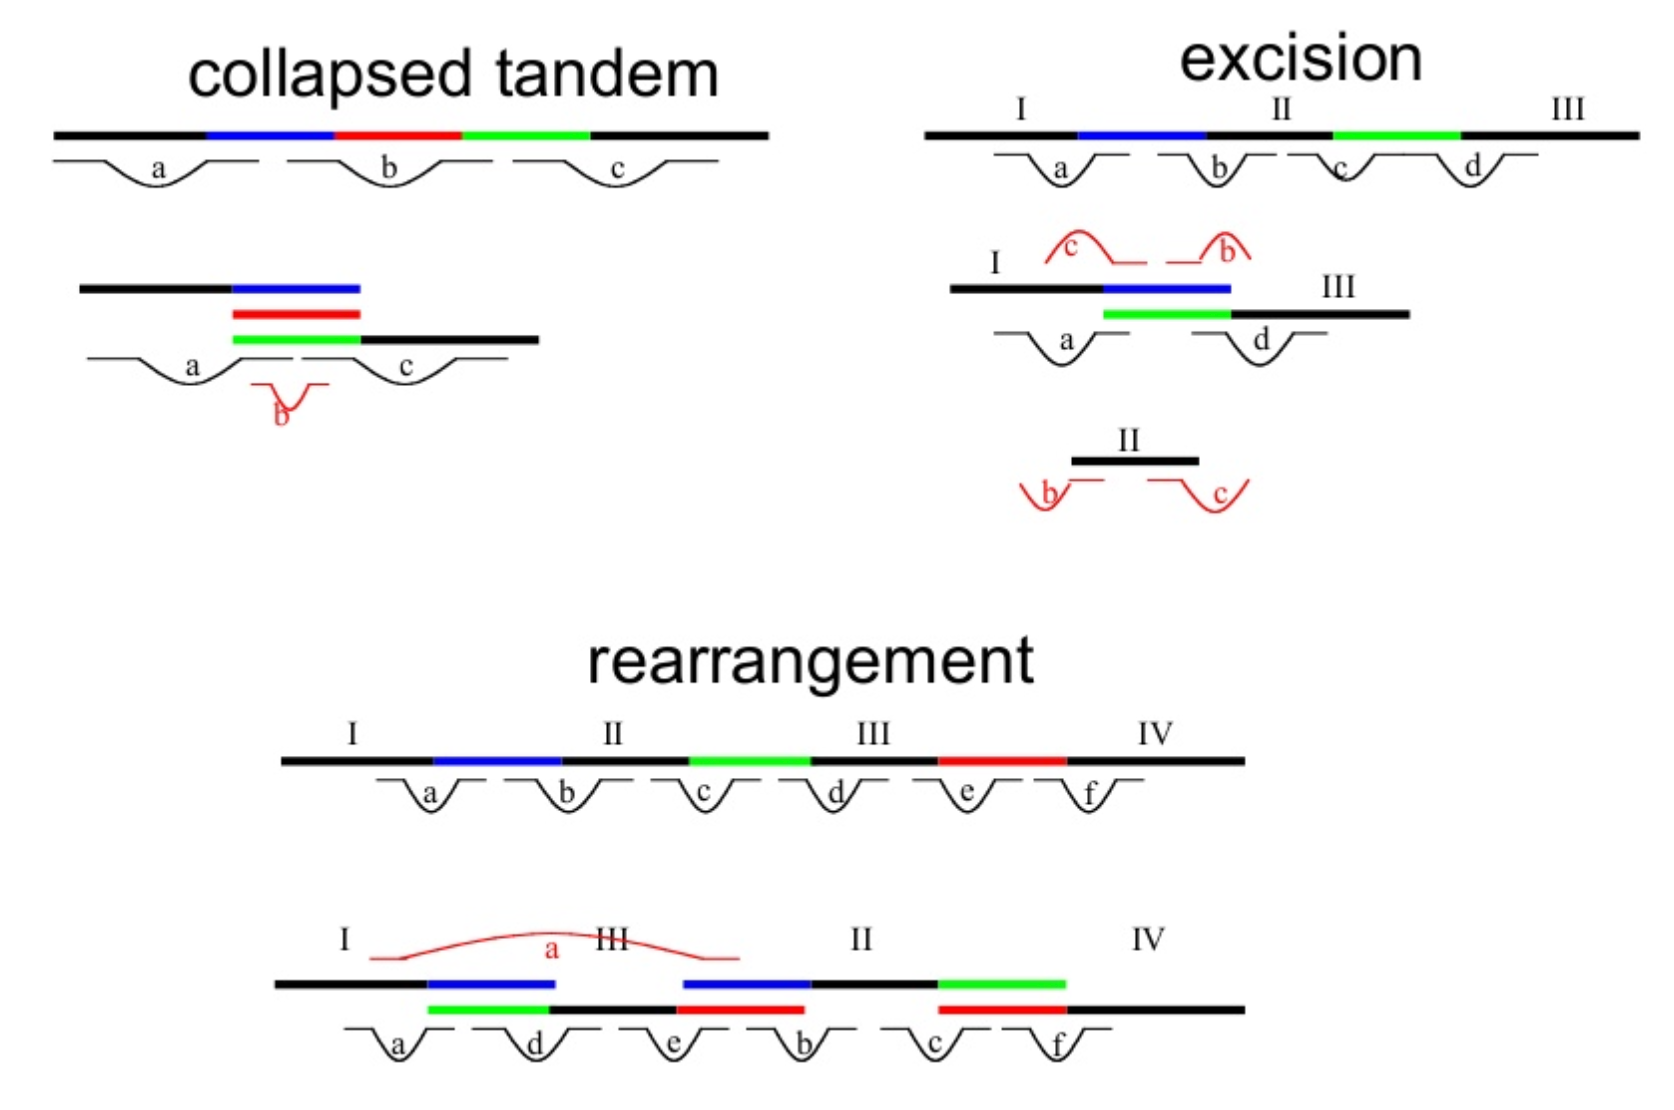 Collapsed, excision and rearrangement consensus